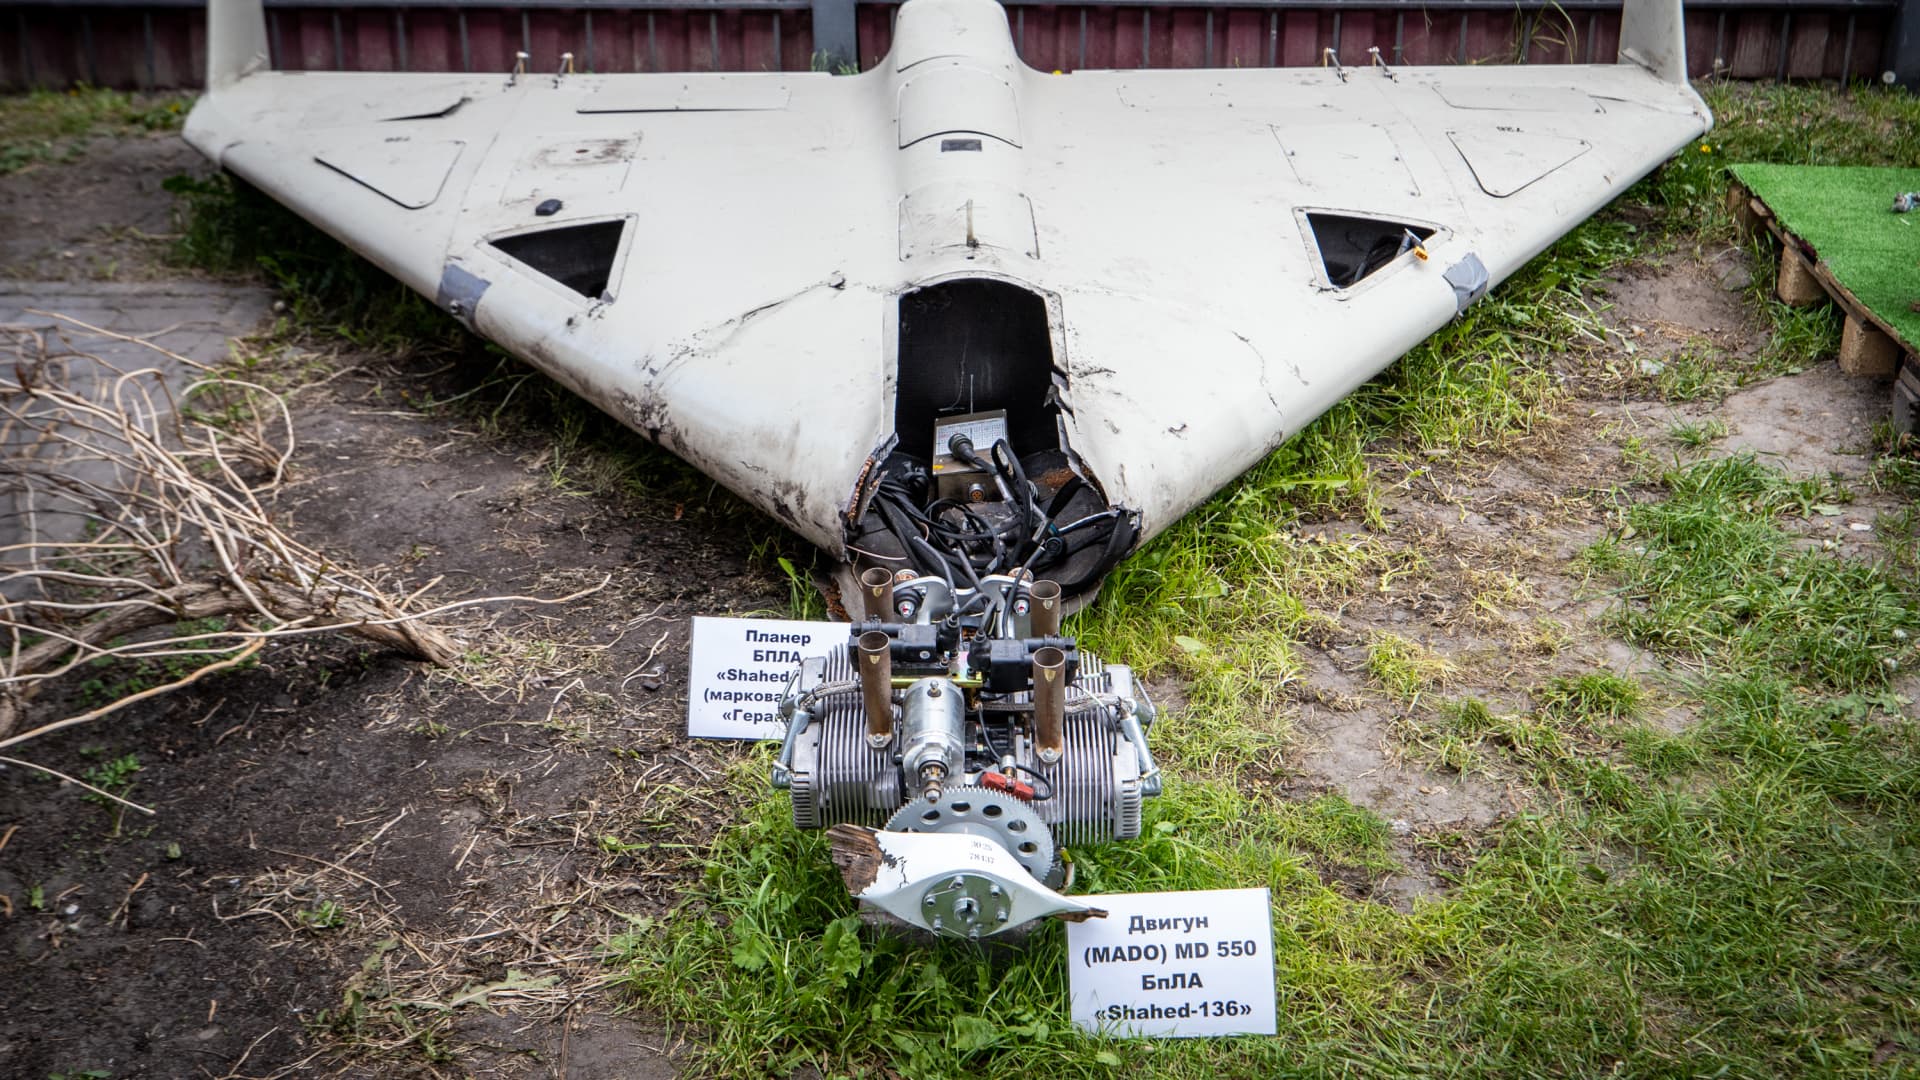 A Shahed 136 at an exhibition showing remains of missiles and drones that Russia used to attack Kyiv, on May 12, 2023 in Kyiv, Ukraine.